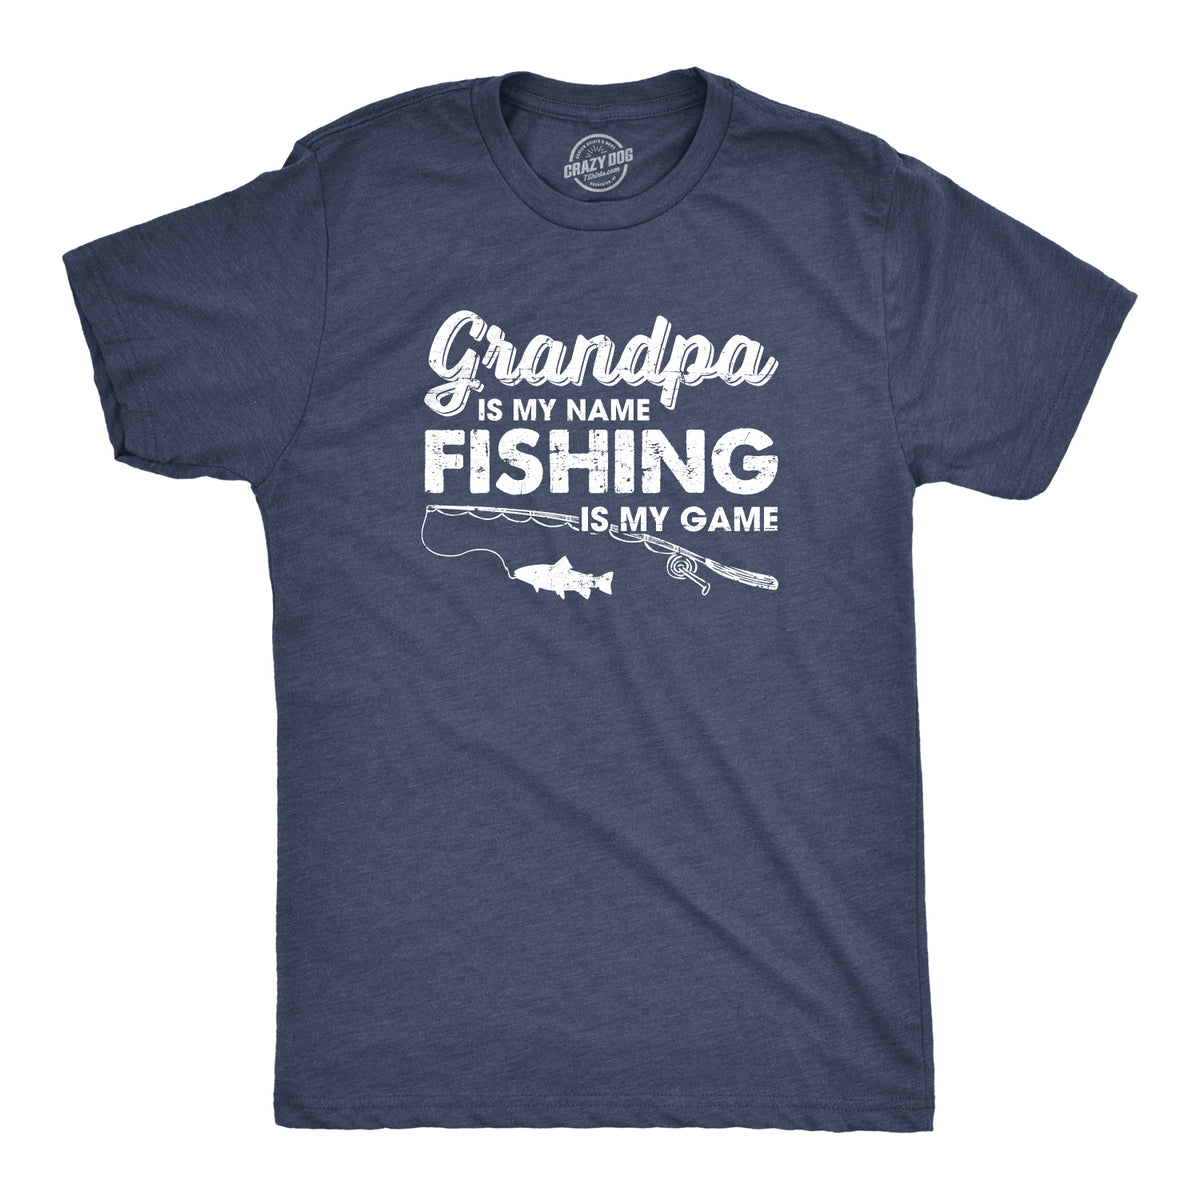 Grandpa Is My Name And Fishing Is My Game Men's T Shirt - Crazy Dog T-Shirts